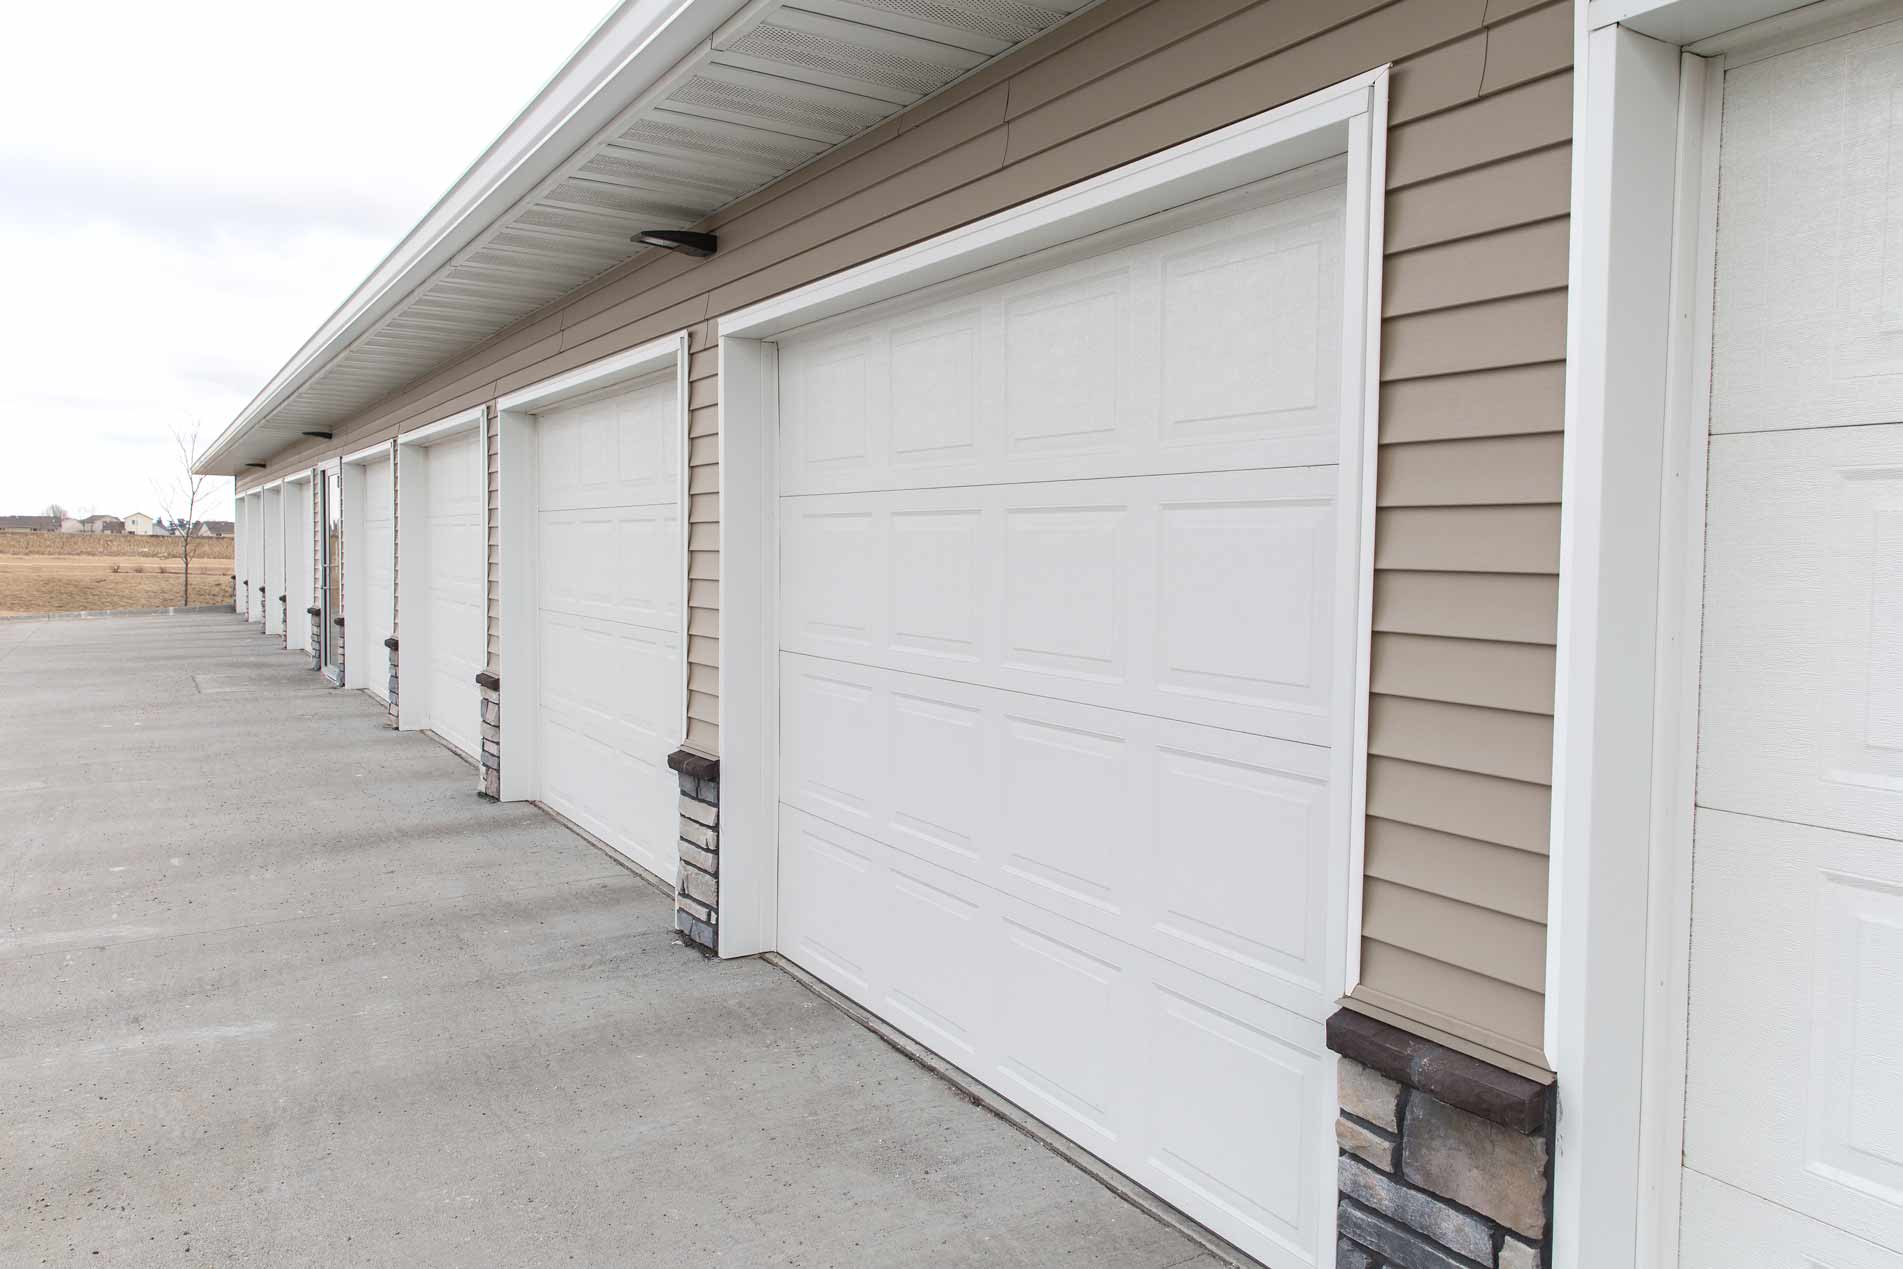 Resident garages at Ironwood, a Haverkamp Properties in Ames, Iowa community